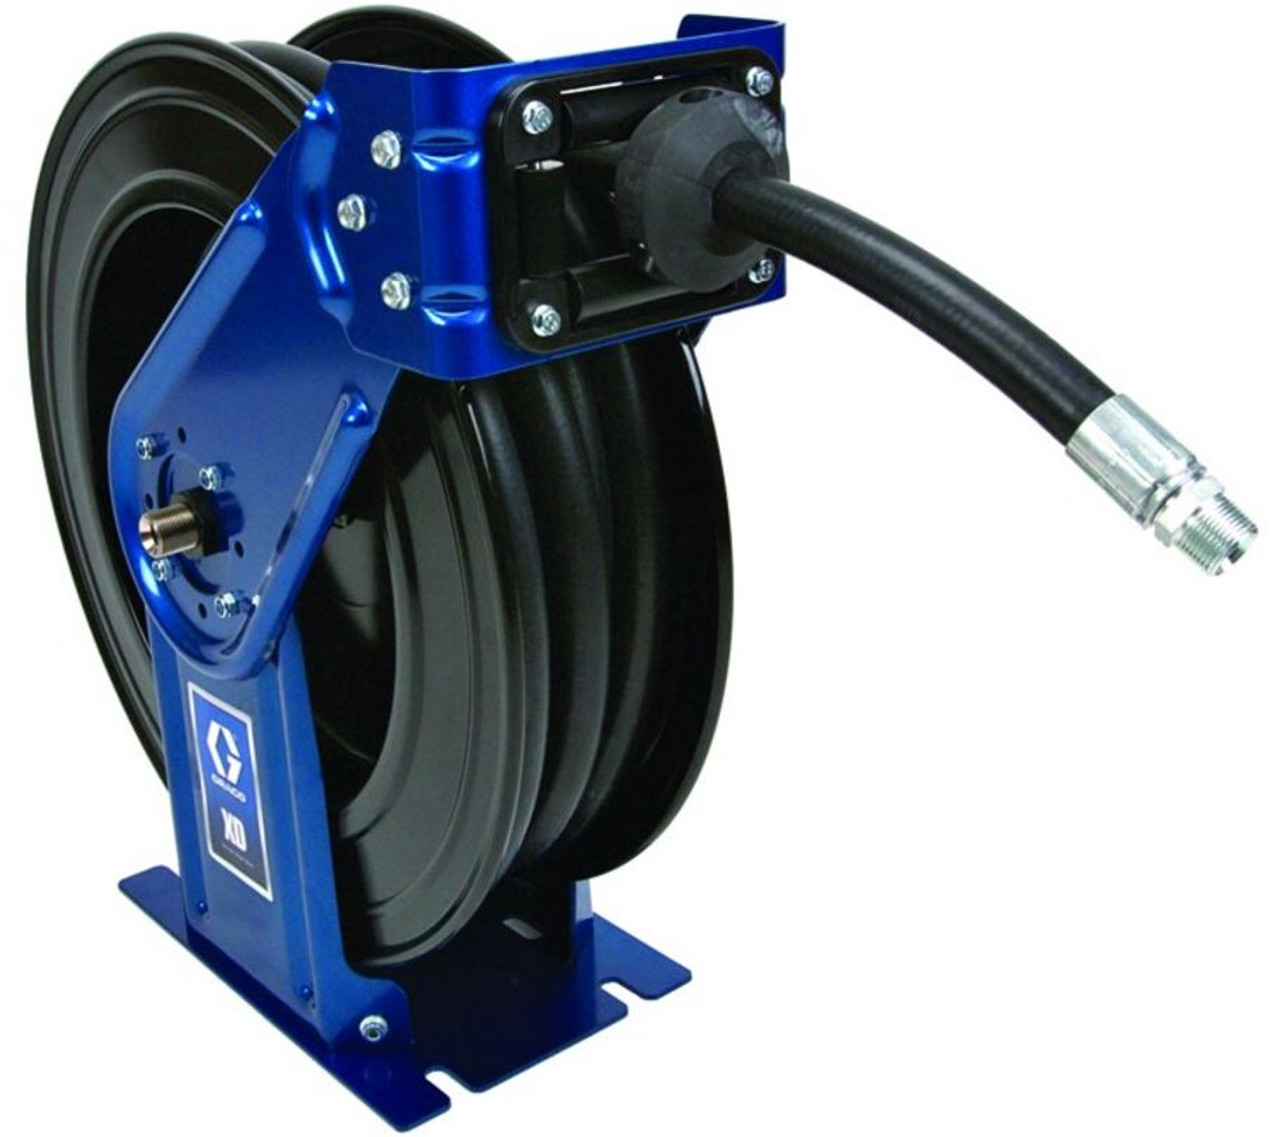 LD™ Series Enclosed Wall Mount Swivel Hose Reel with 3/8 in X 35 ft (10 mm  x 11 m) NPT Hose for Air/Water Applications